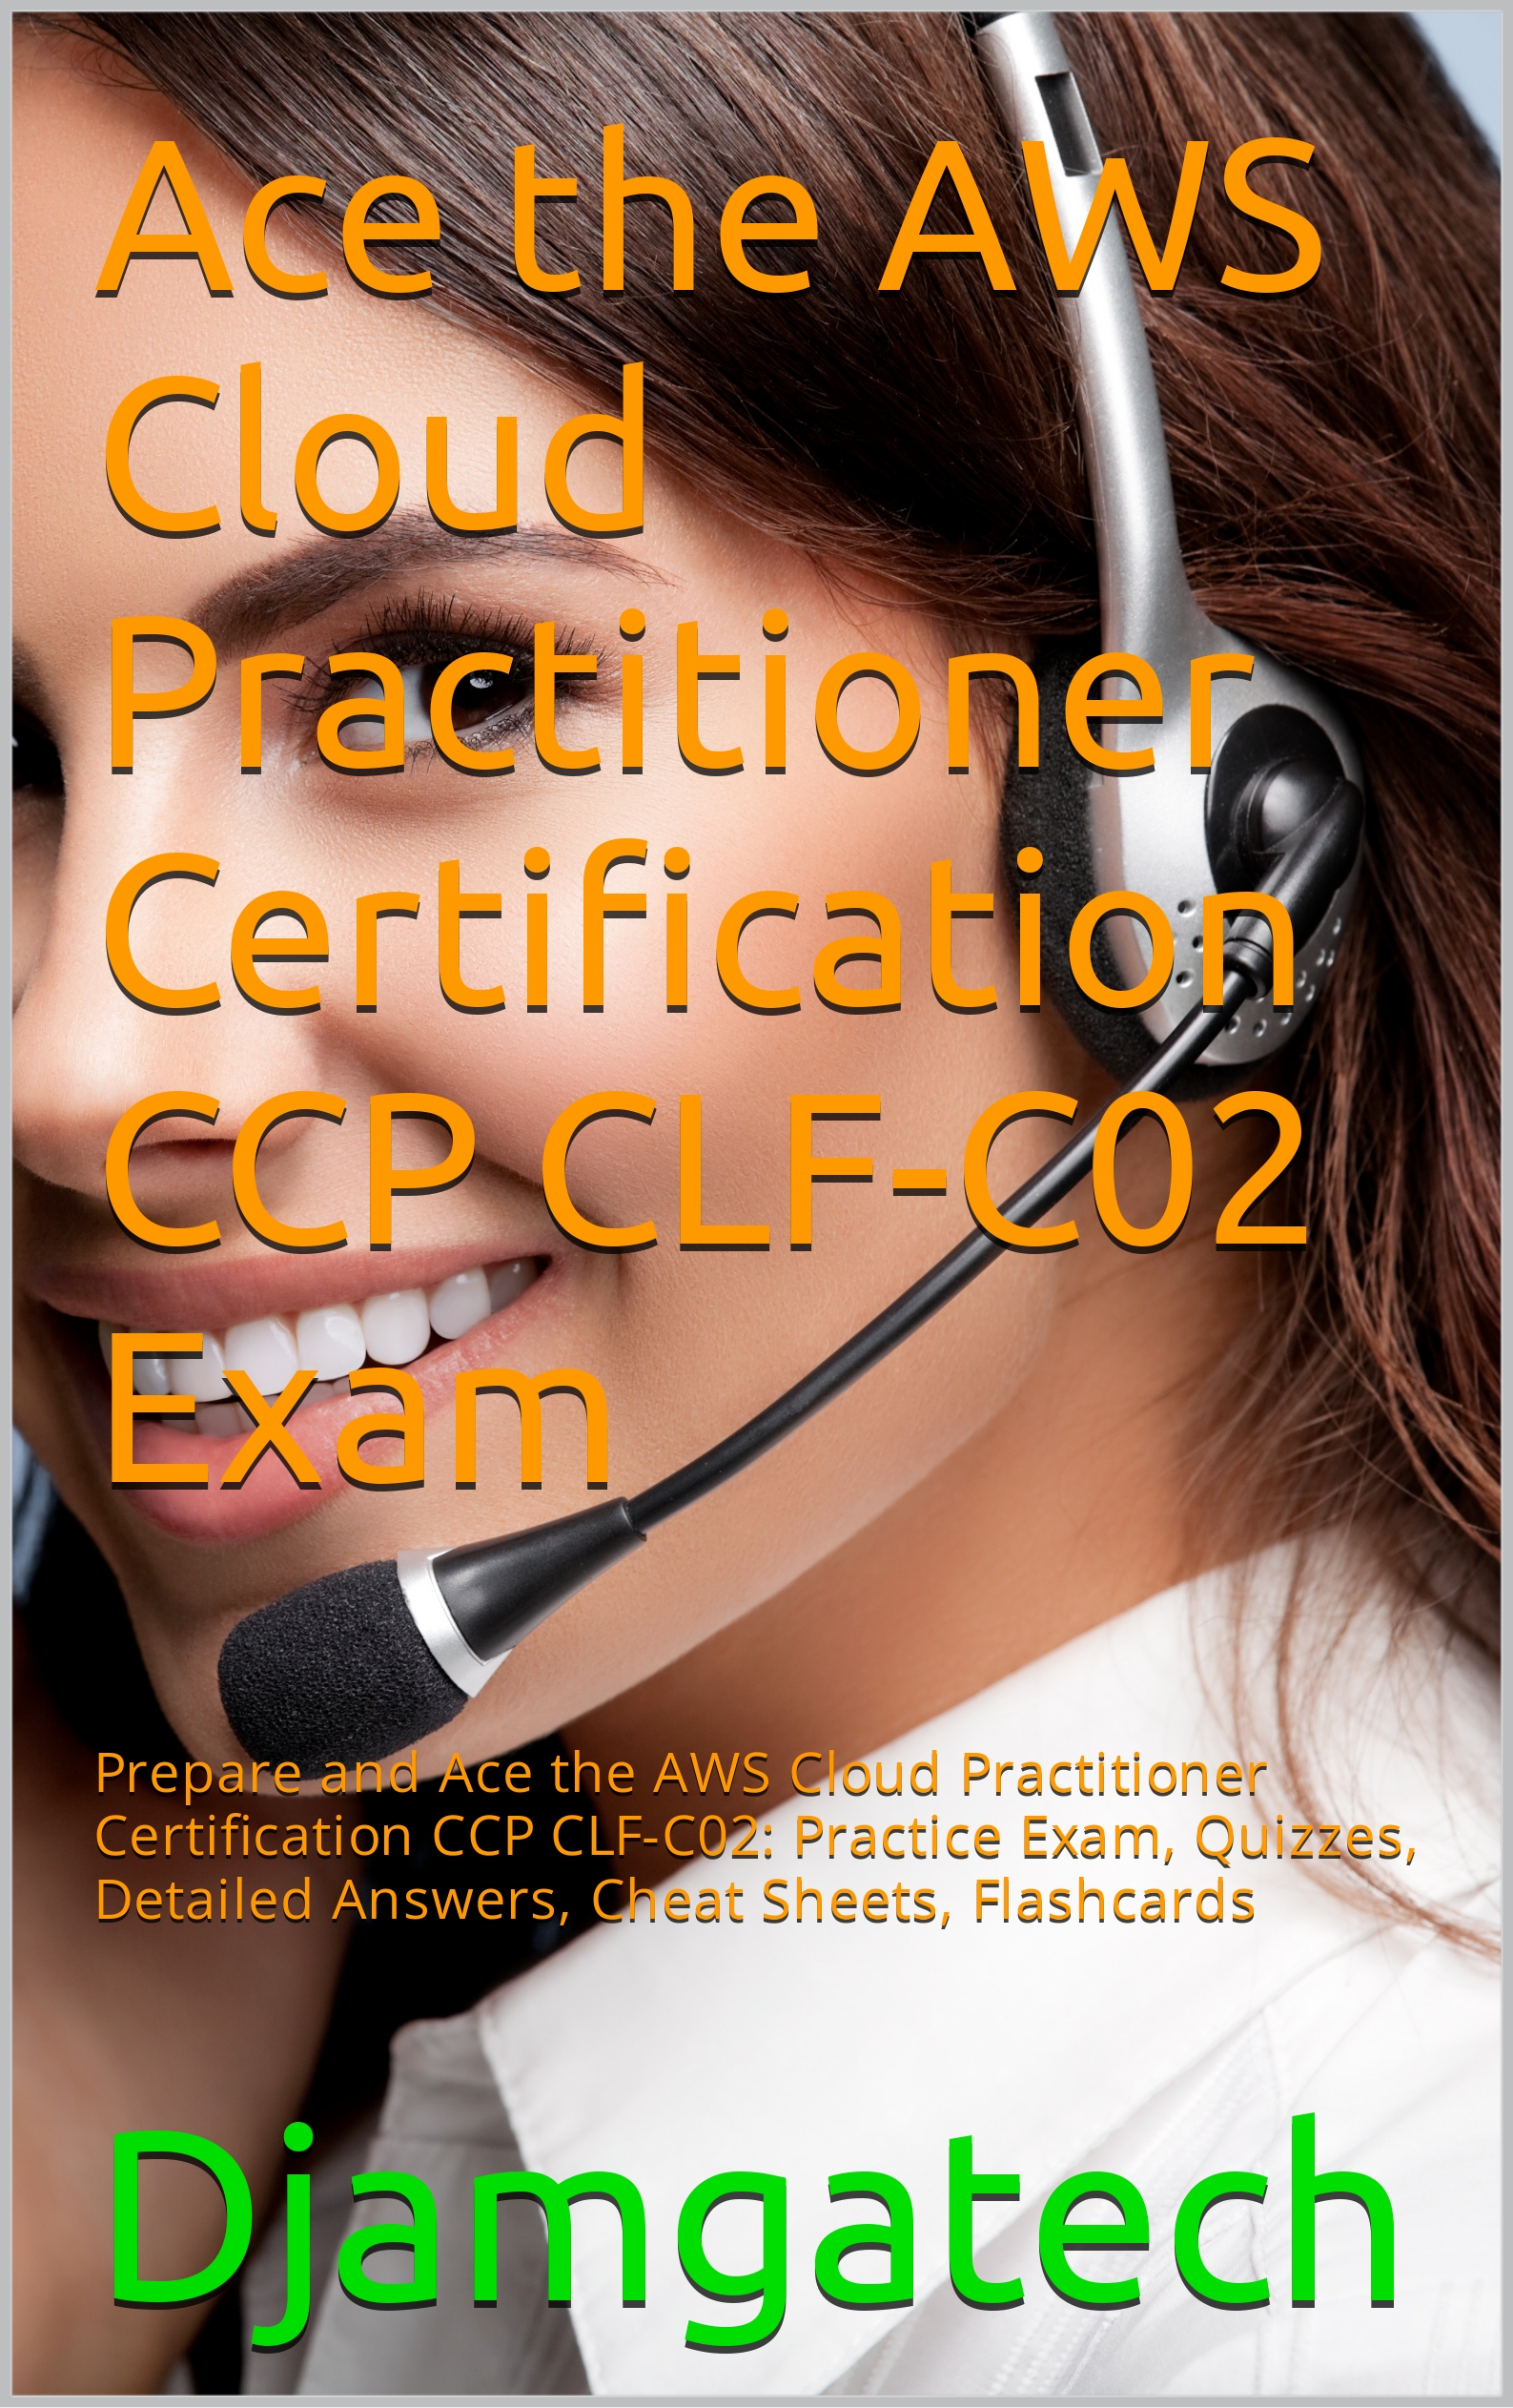 Ace the AWS Cloud Practitioner Certification CCP CLF-C02 Exam: Prepare and Ace the AWS Cloud Practitioner Certification CCP CLF-C02: Practice Exam, Quizzes, Detailed Answers, Cheat Sheets, Flashcards